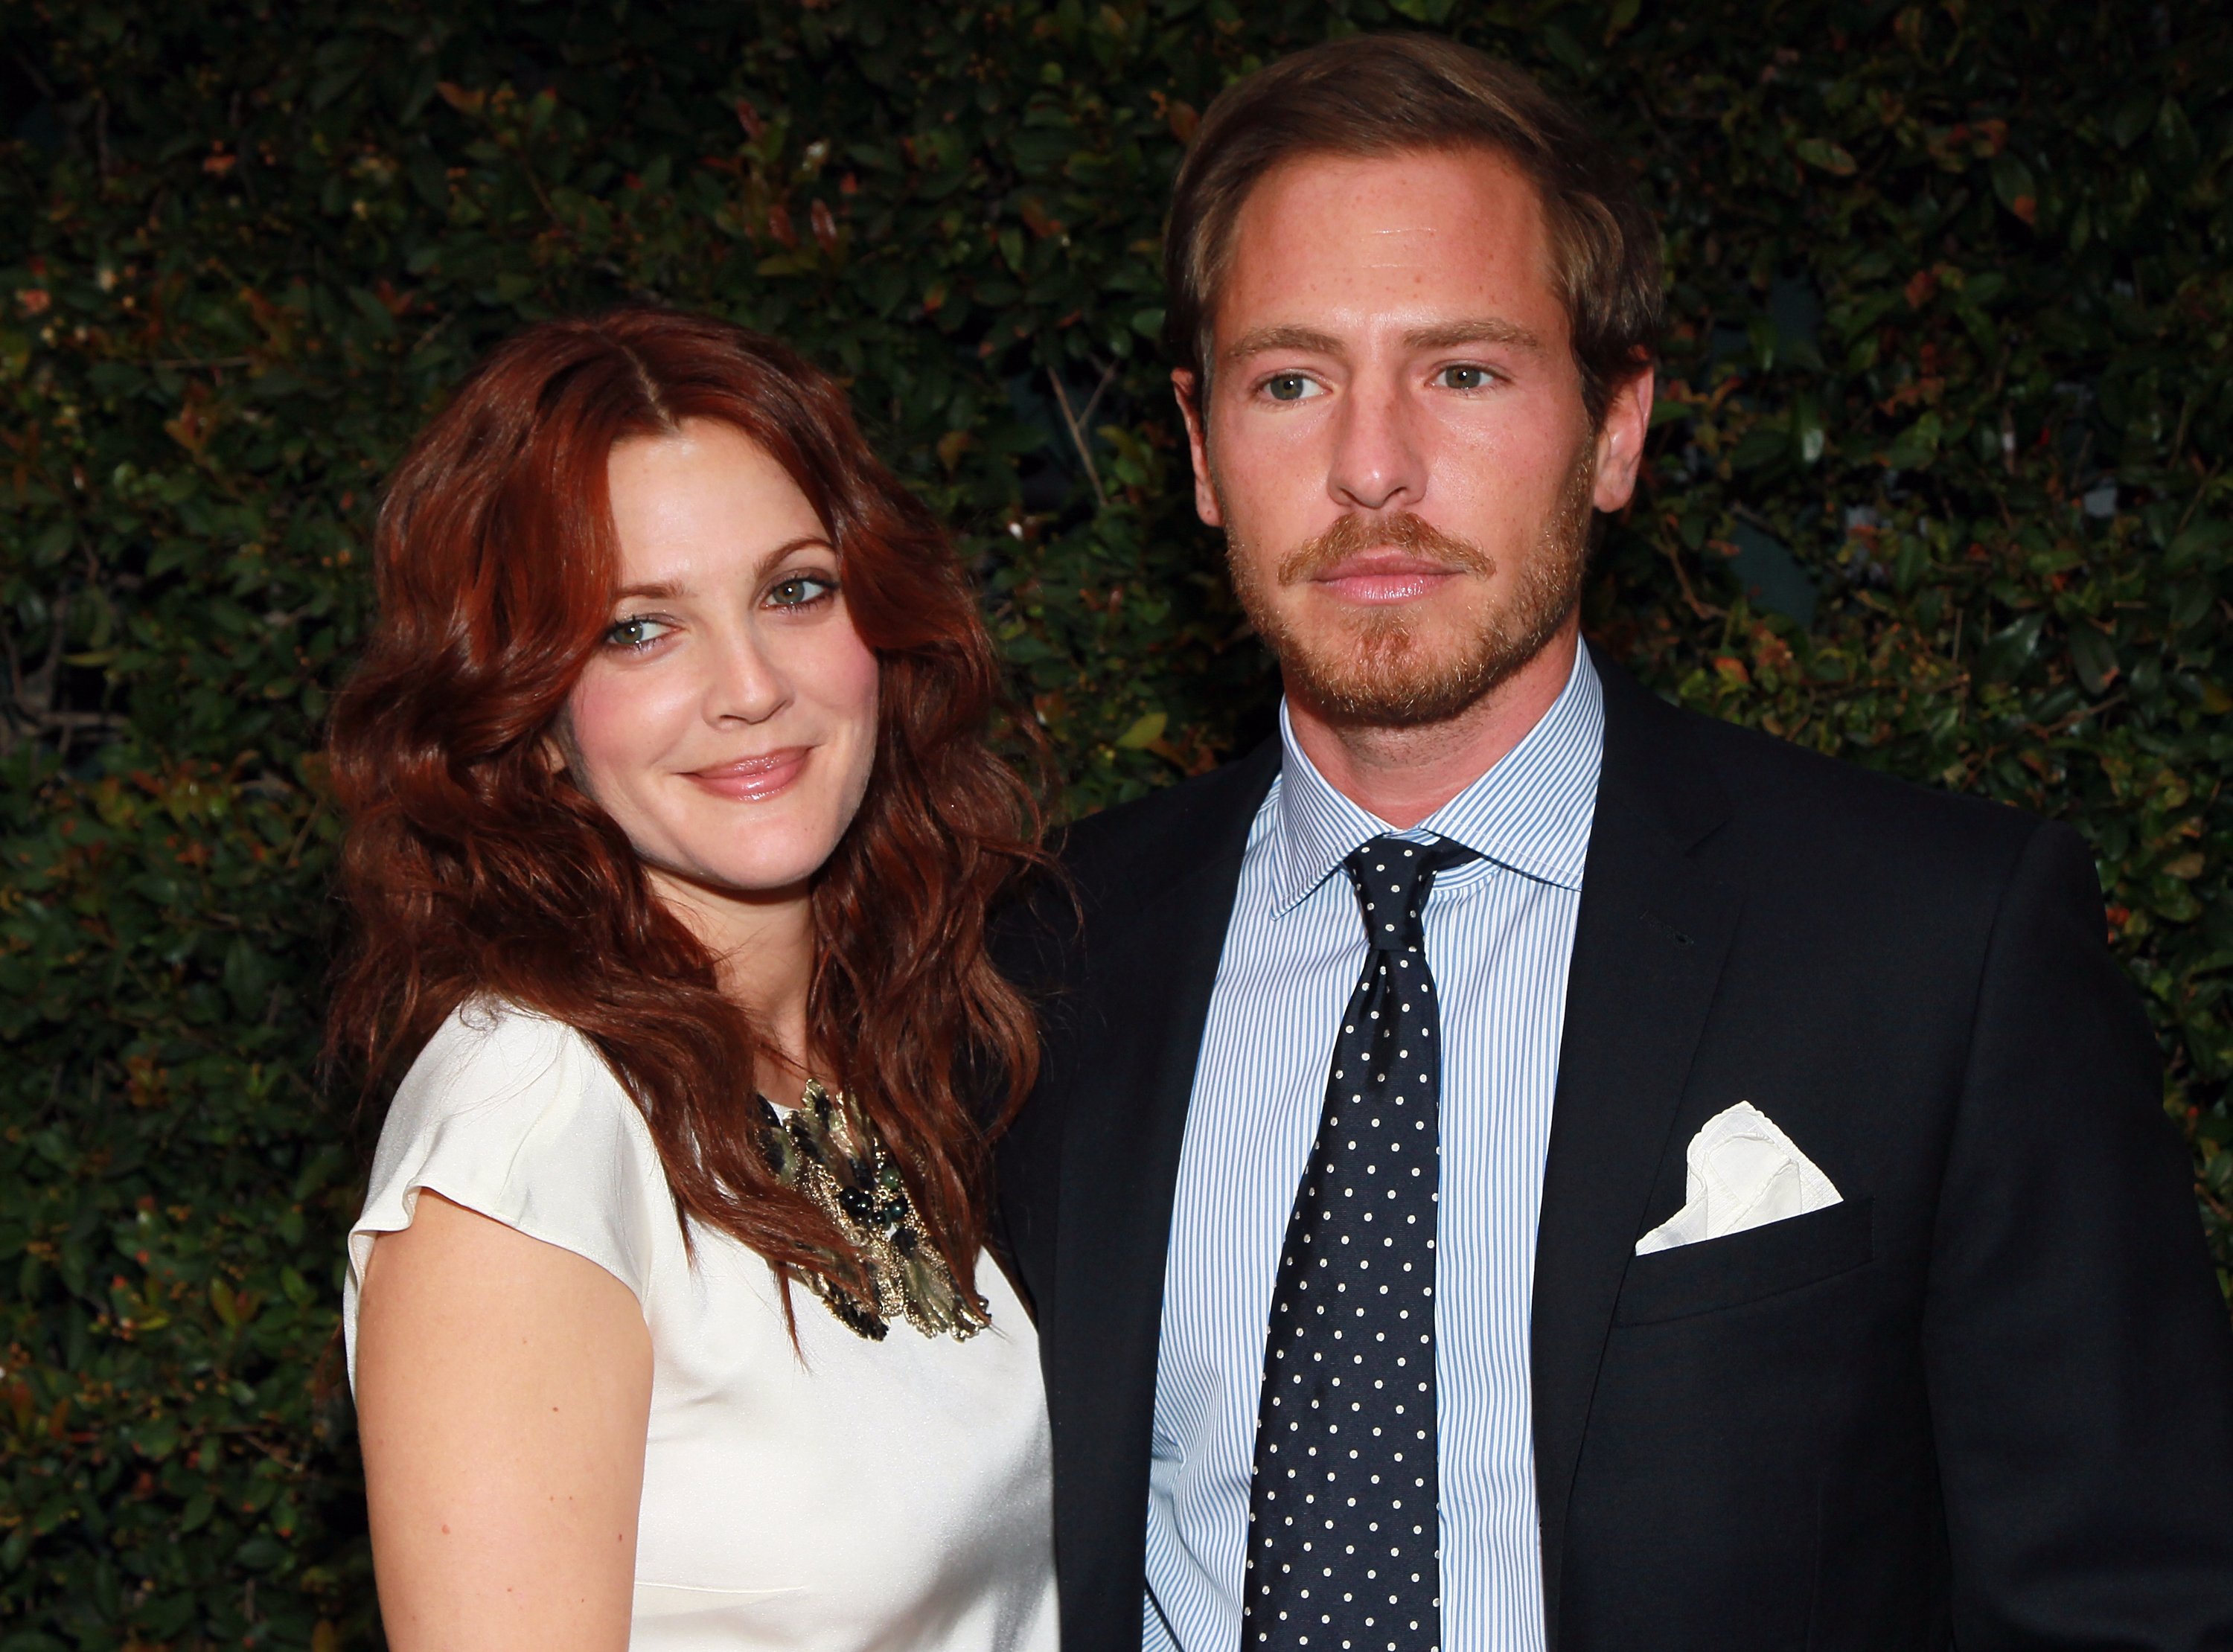 Actress Drew Barrymore and art consultant, Will Kopelman, during the Chanel's benefit dinner for the Natural Resources Defense Council's Ocean Initiative at the home of Ron & Kelly Meyer on June 4, 2011 in Malibu, California. / Source: Getty Images